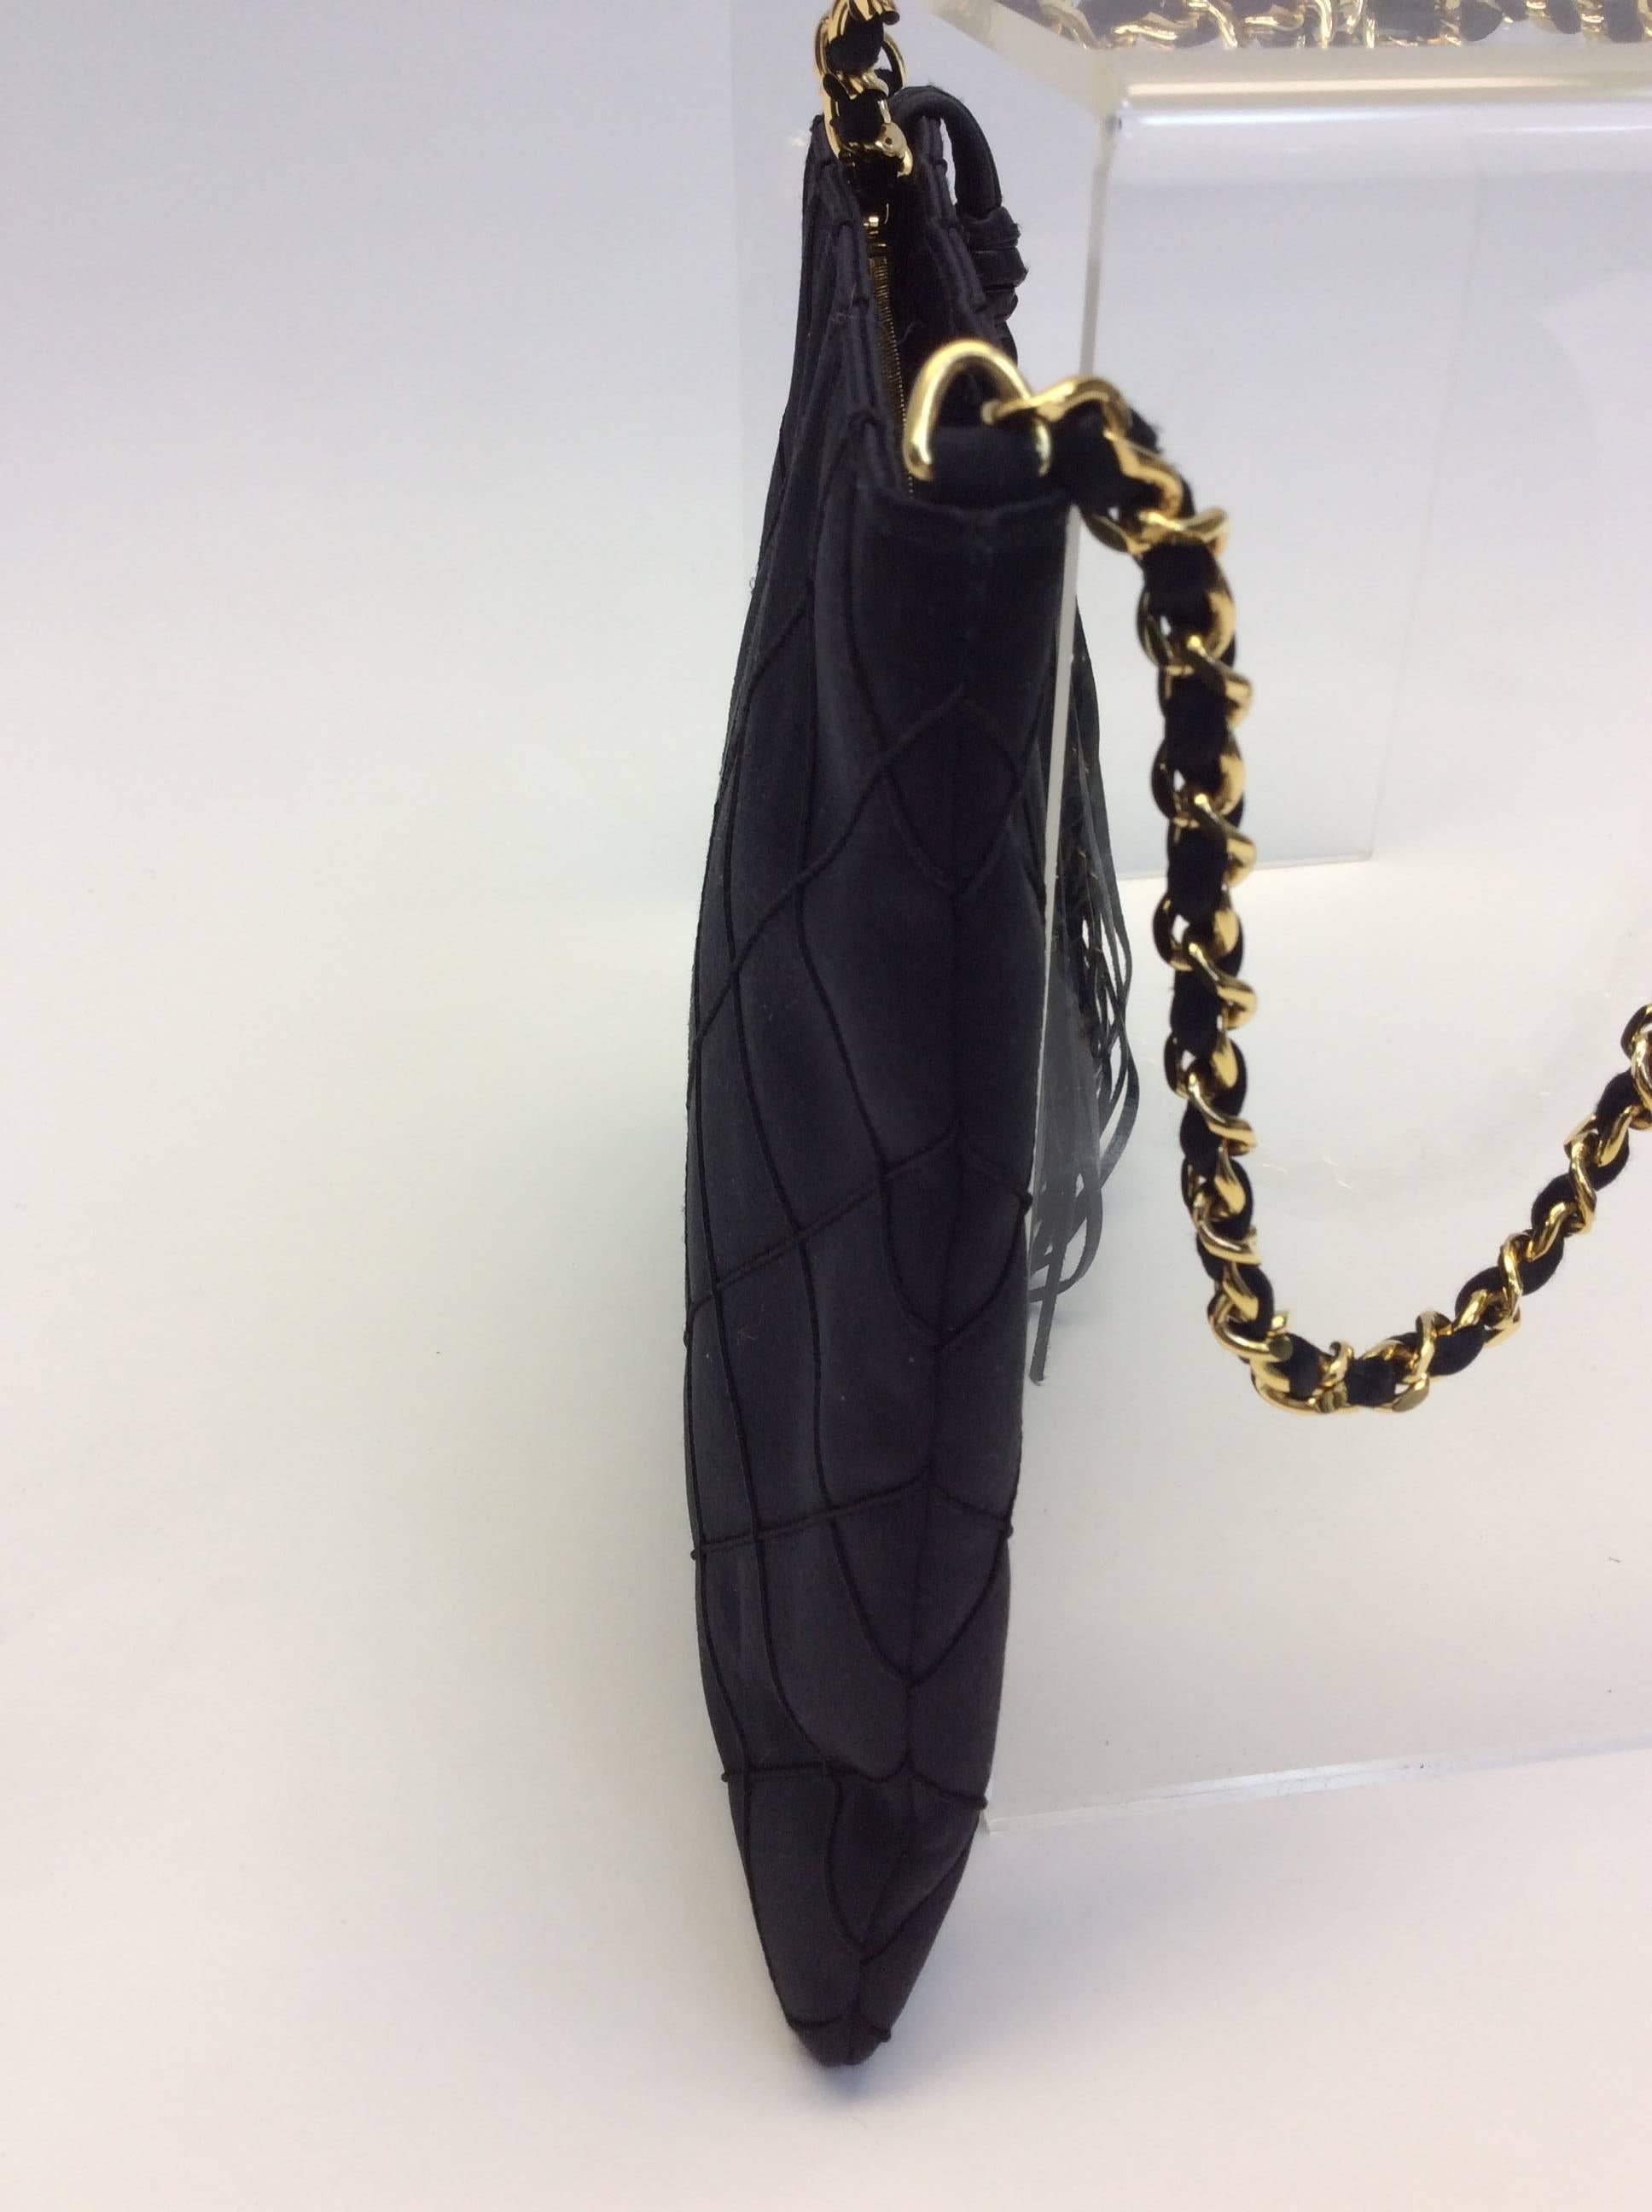 Chanel Black Satin Crossbody In Excellent Condition For Sale In Narberth, PA